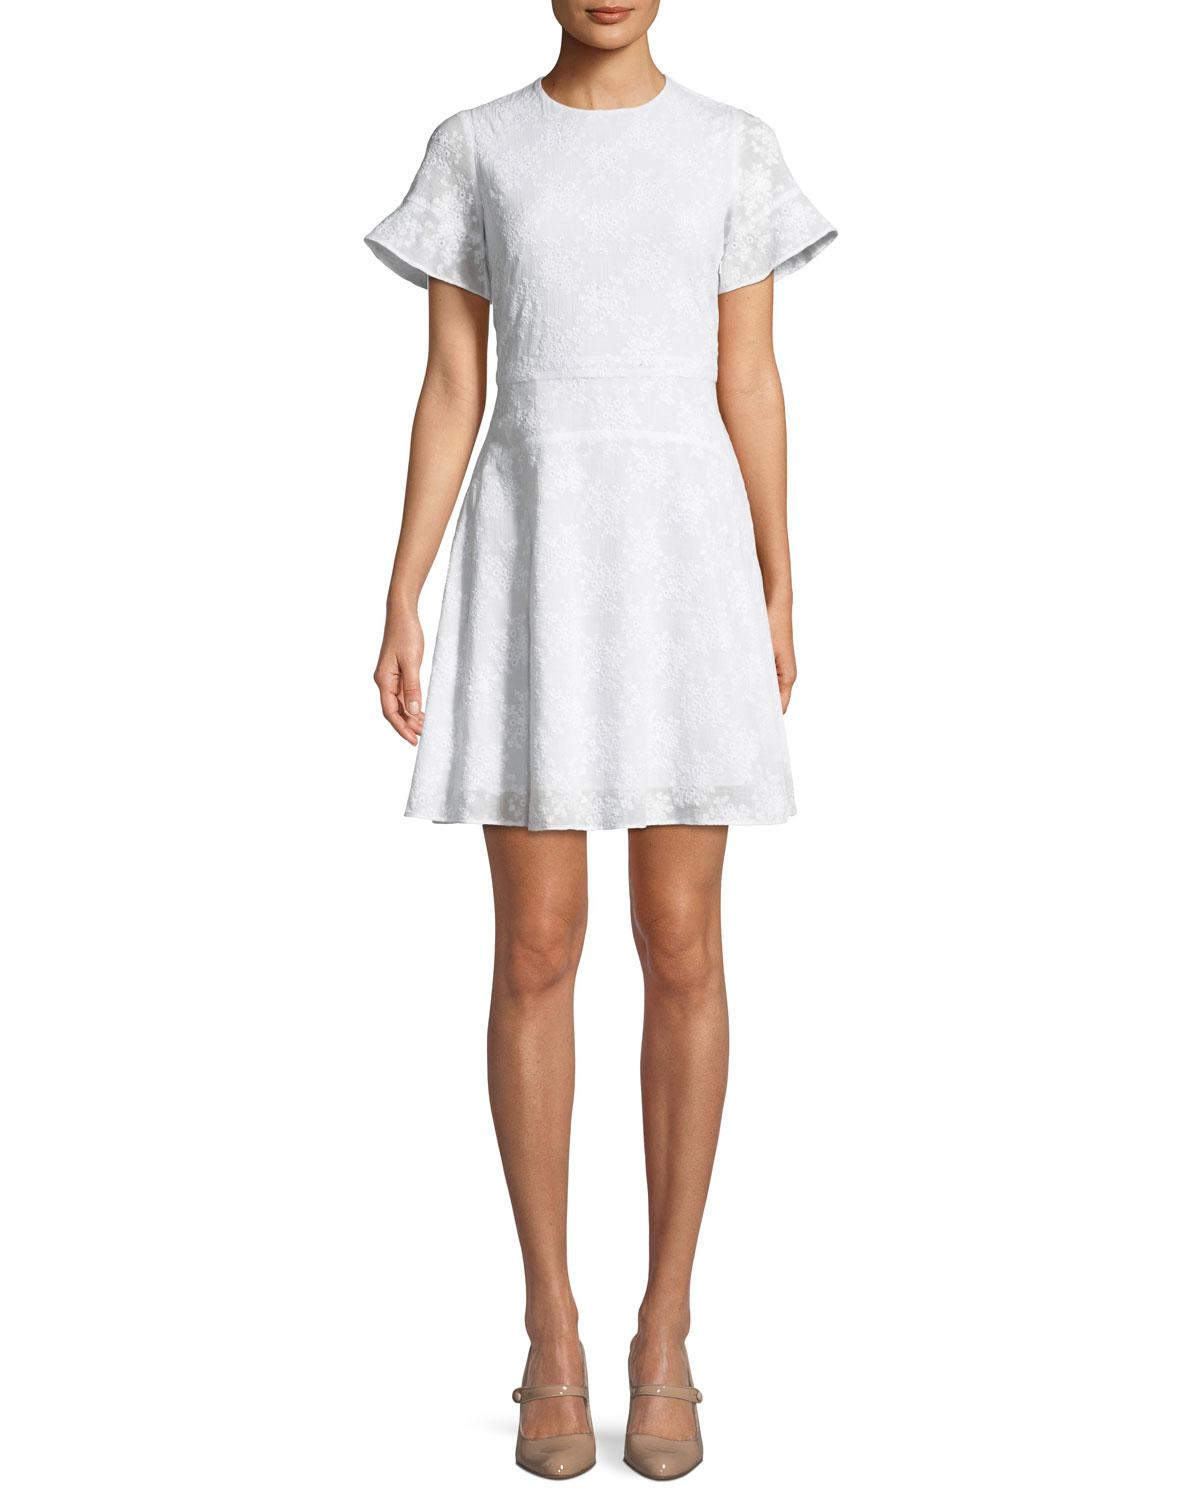 MICHAEL Michael Kors Floral-applique Puff-sleeve Mini Dress in White - Lyst